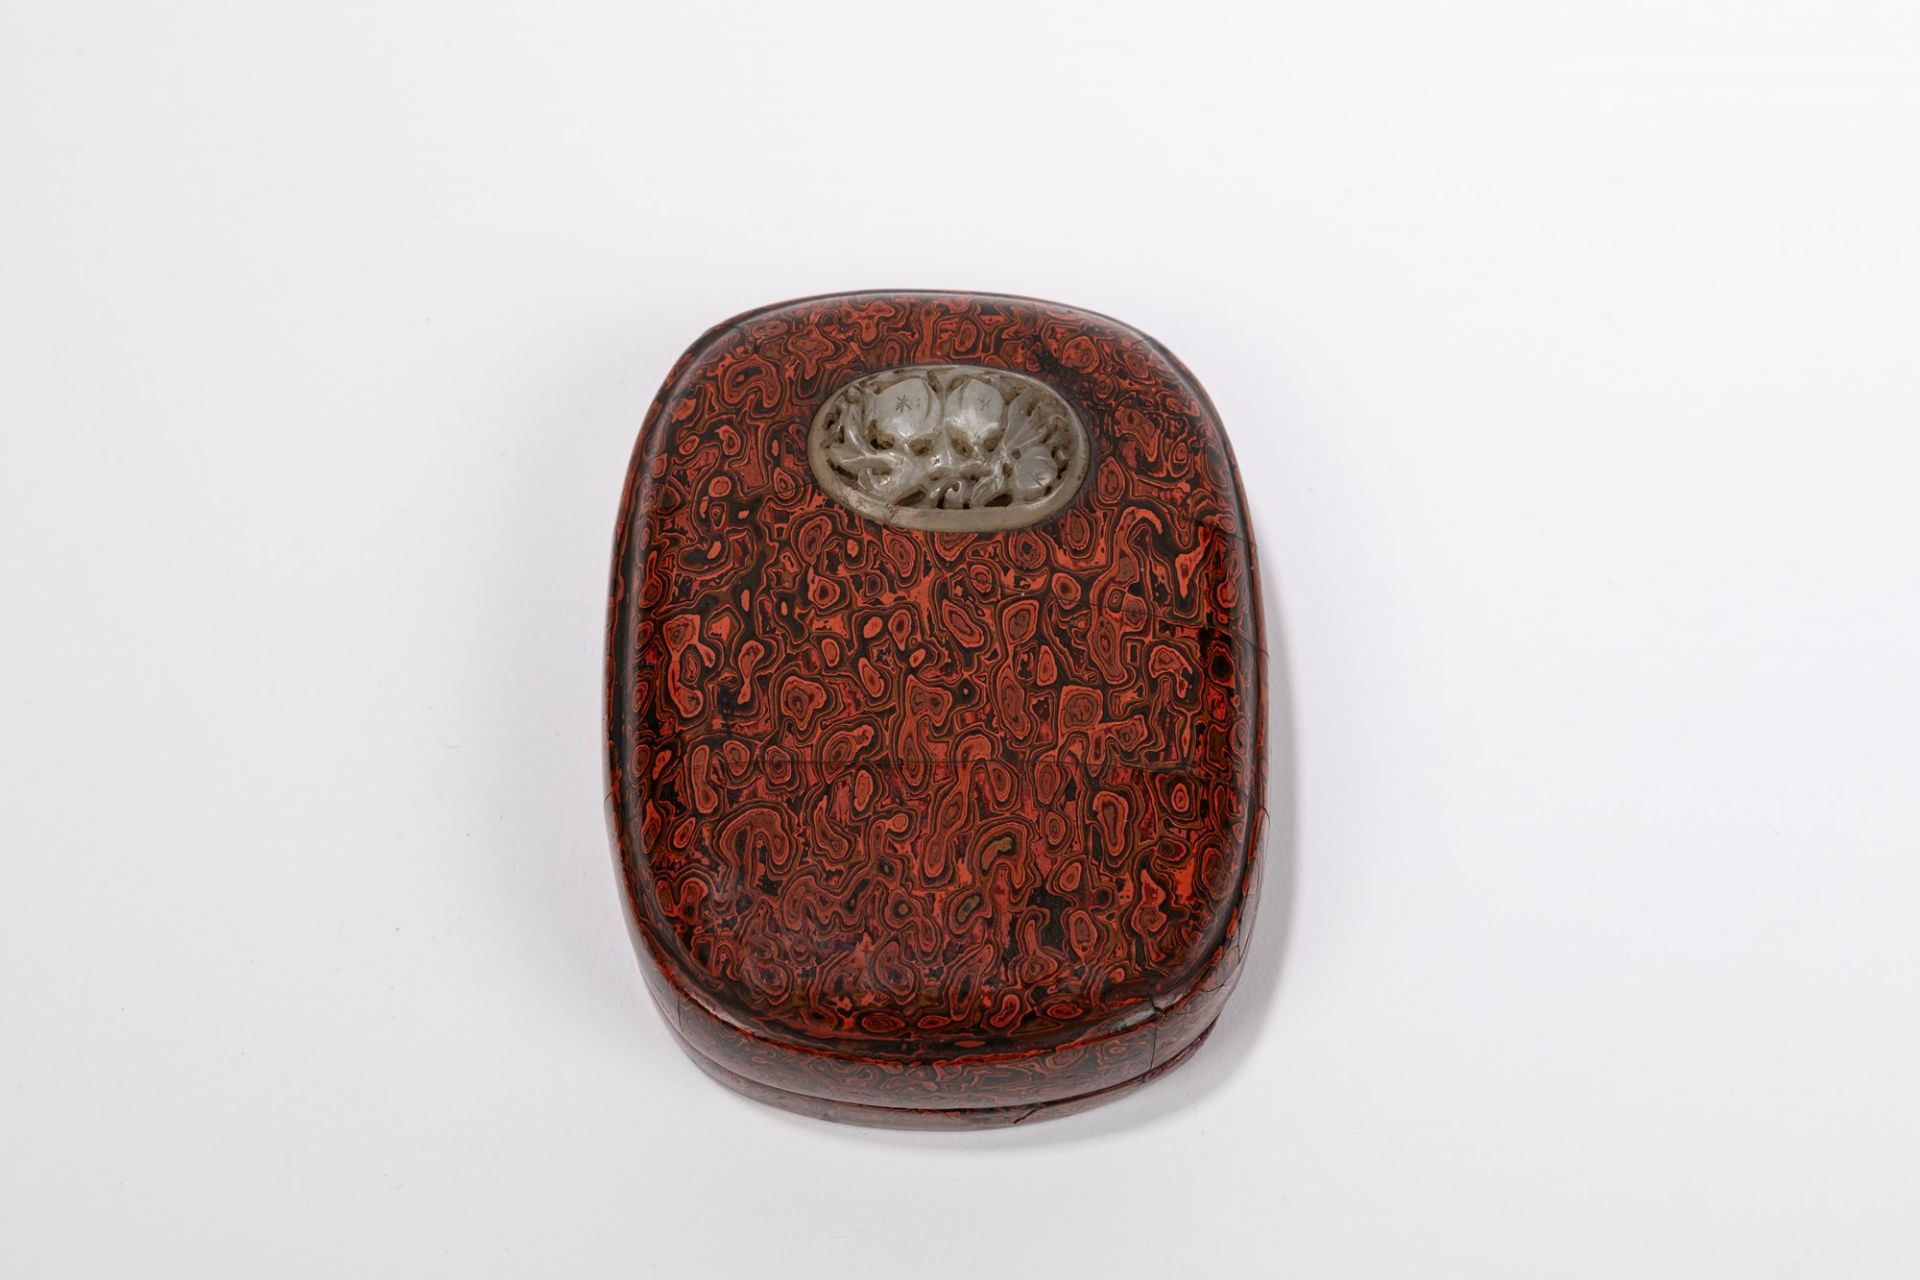 INK STONE WITH LACQUER BOX, China, Qing dynasty, 18th / 19th century